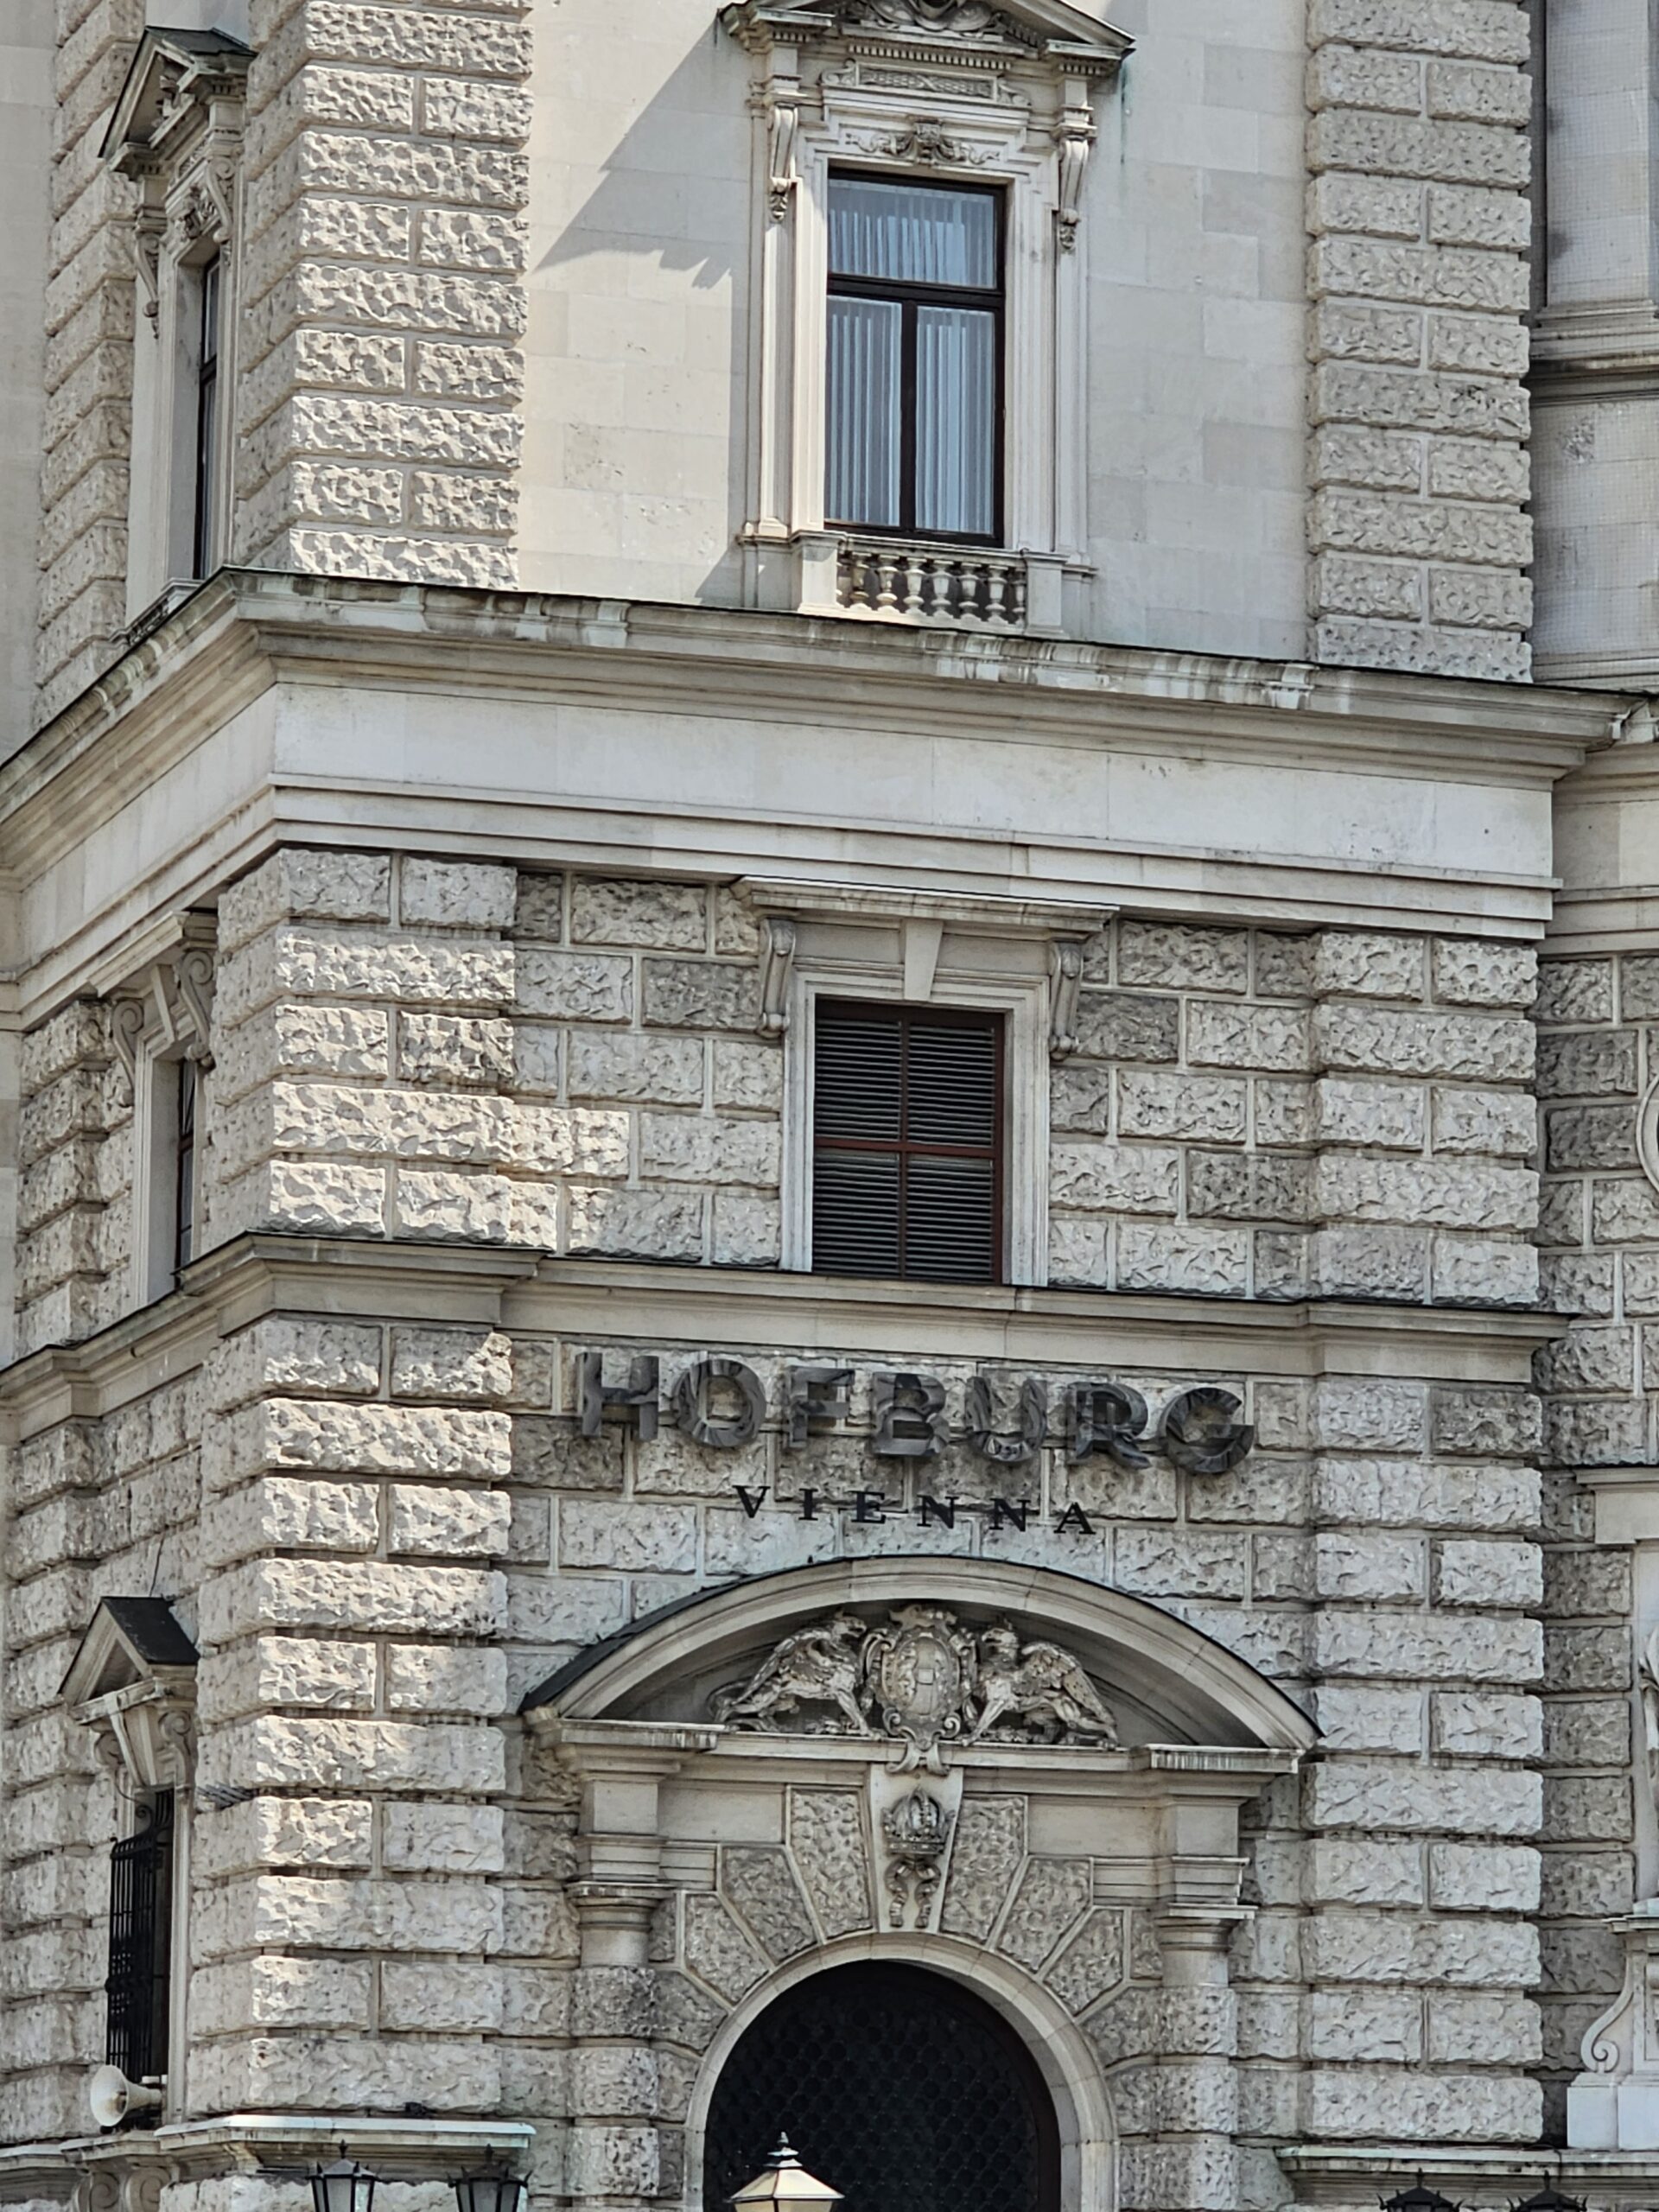 Side building of Hofburg Palace with Hofburg written on it.